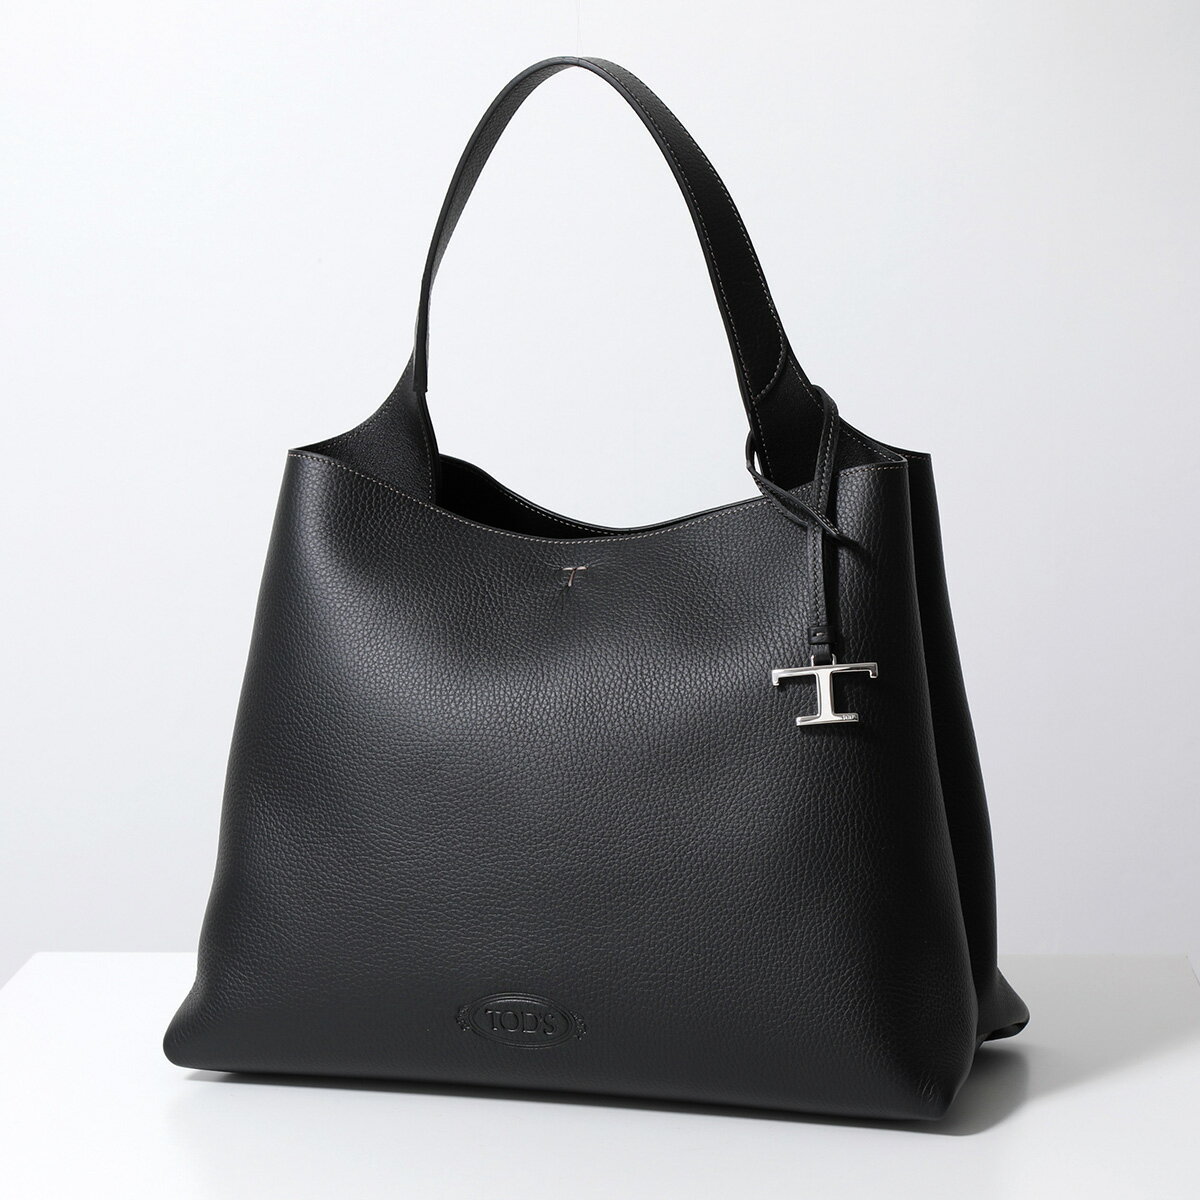 TODS トッズ トートバッグ T TIMELESS Tタイムレス XBWAPAA9300QRI レディース ハンドバッグ 鞄 B999【po_fifth】